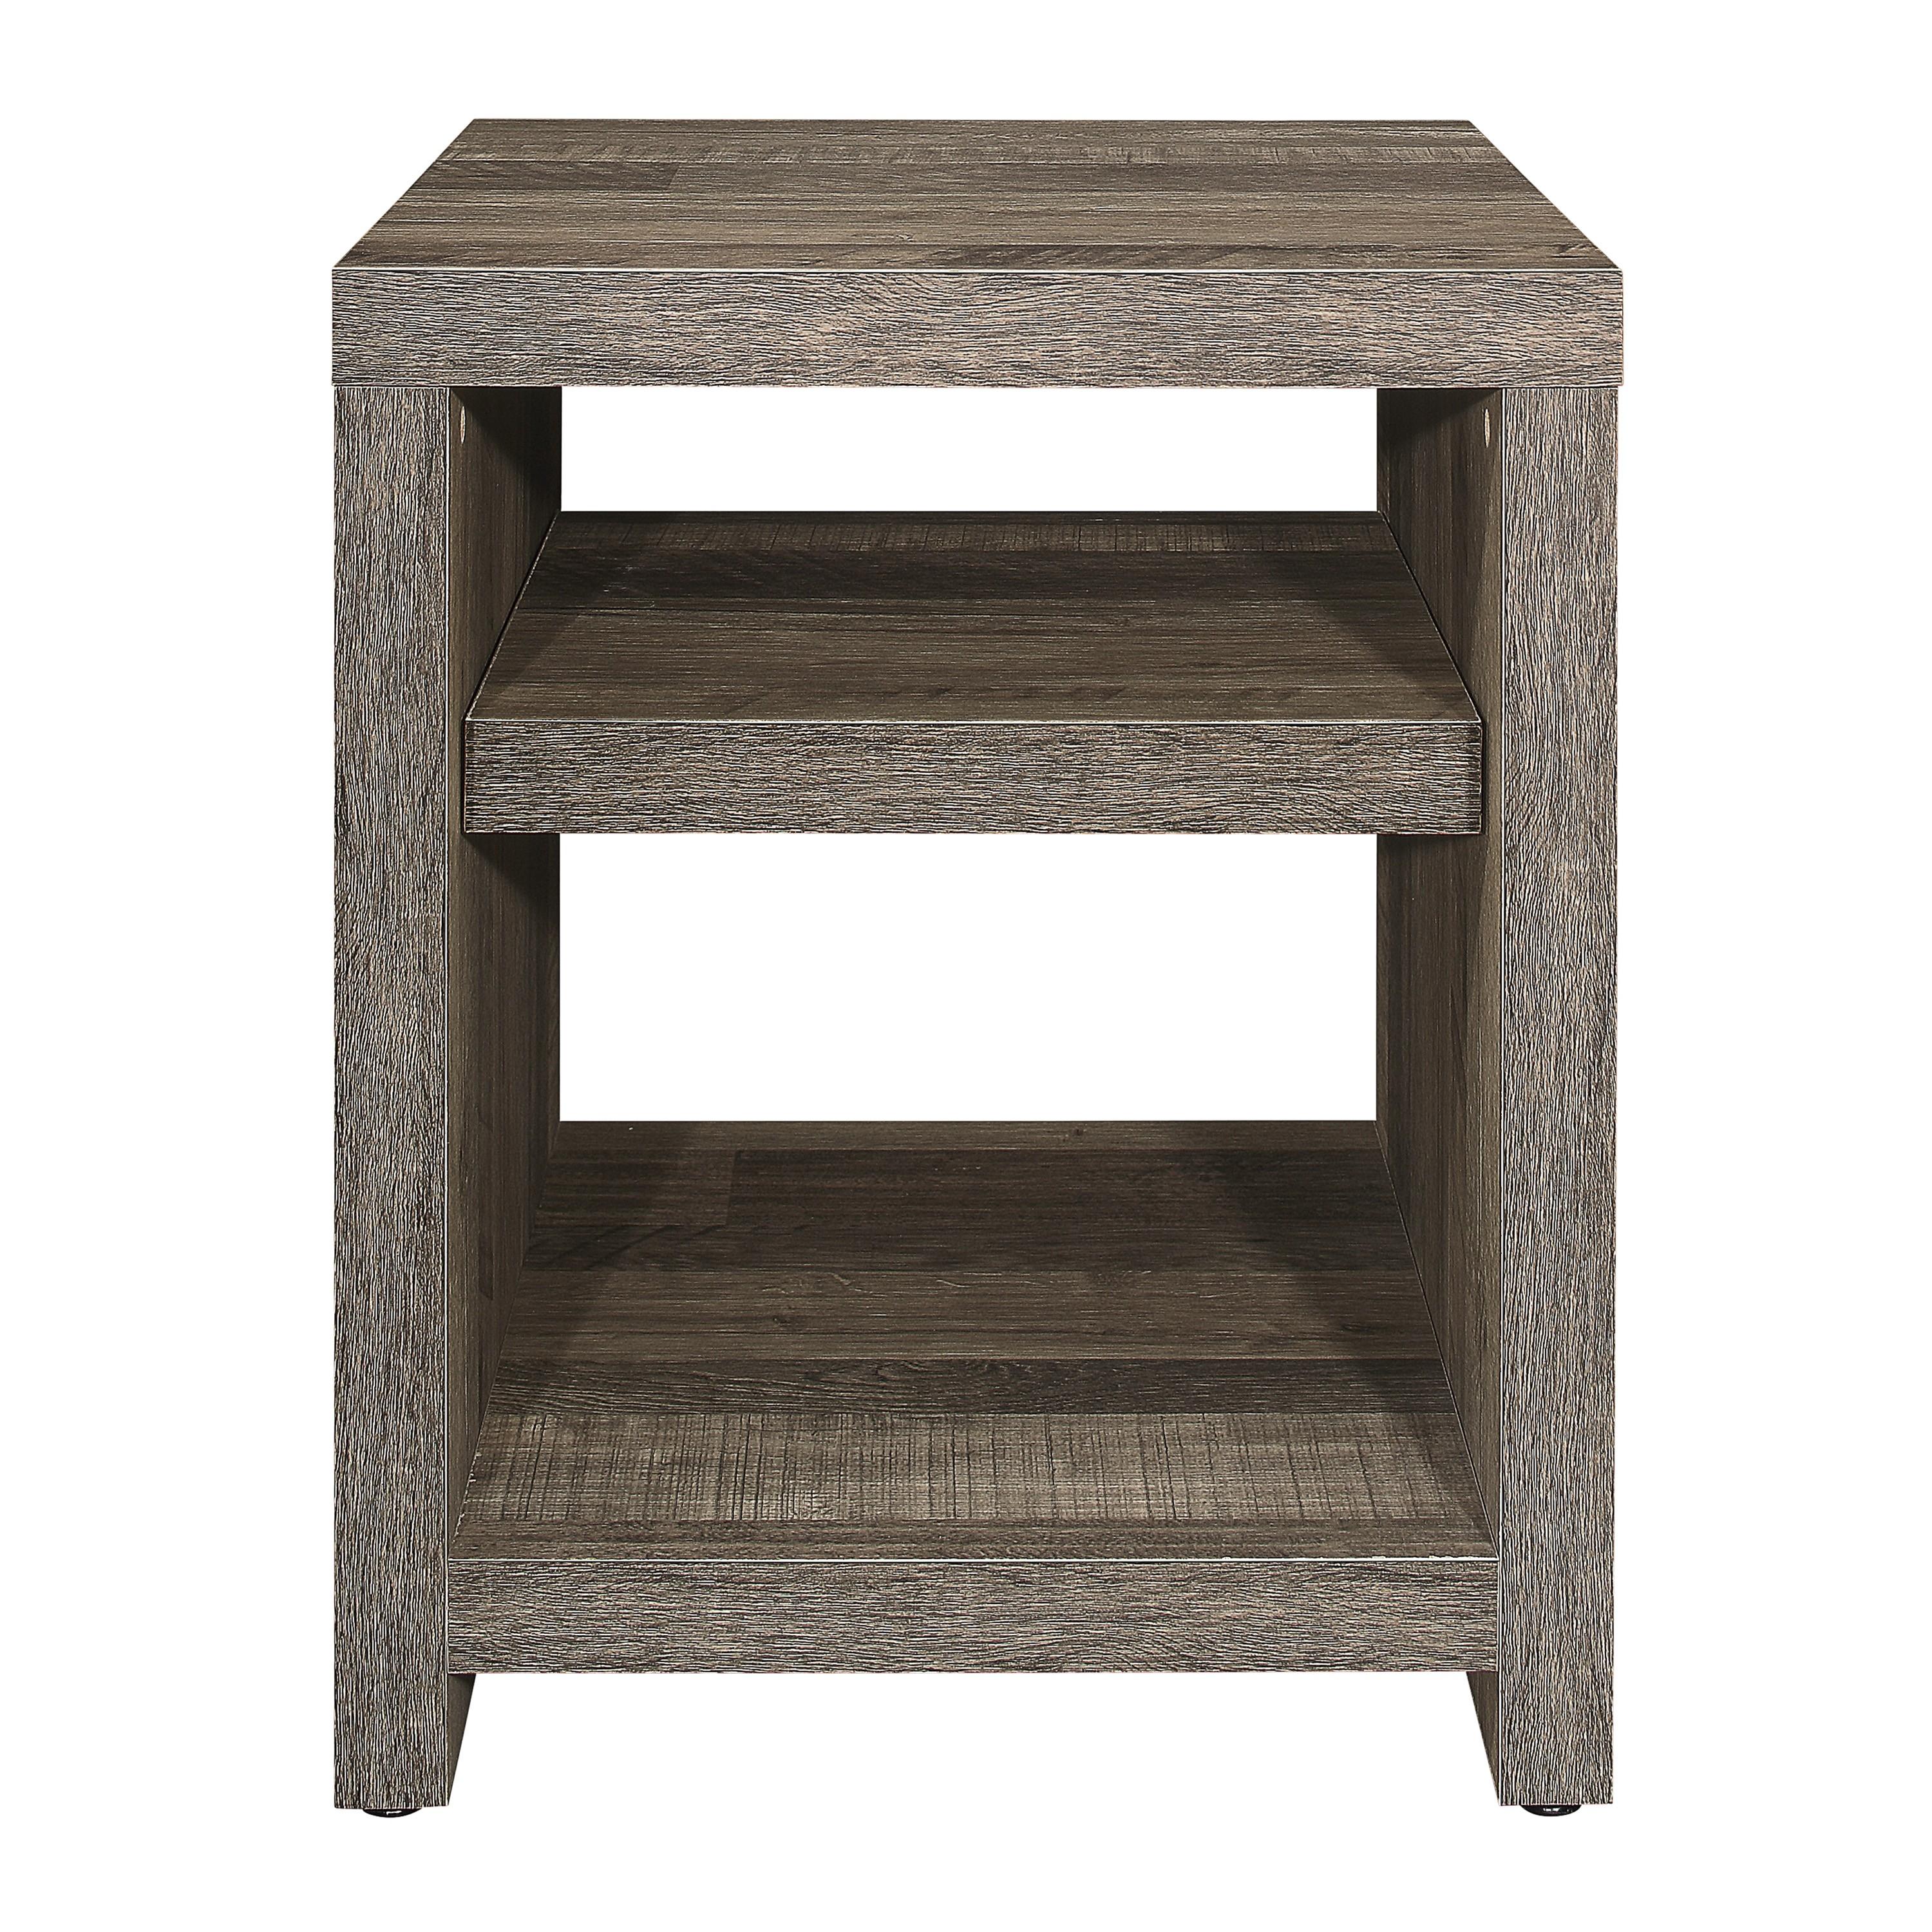 Modern End Table 3666-04S Danio 3666-04S in Natural 